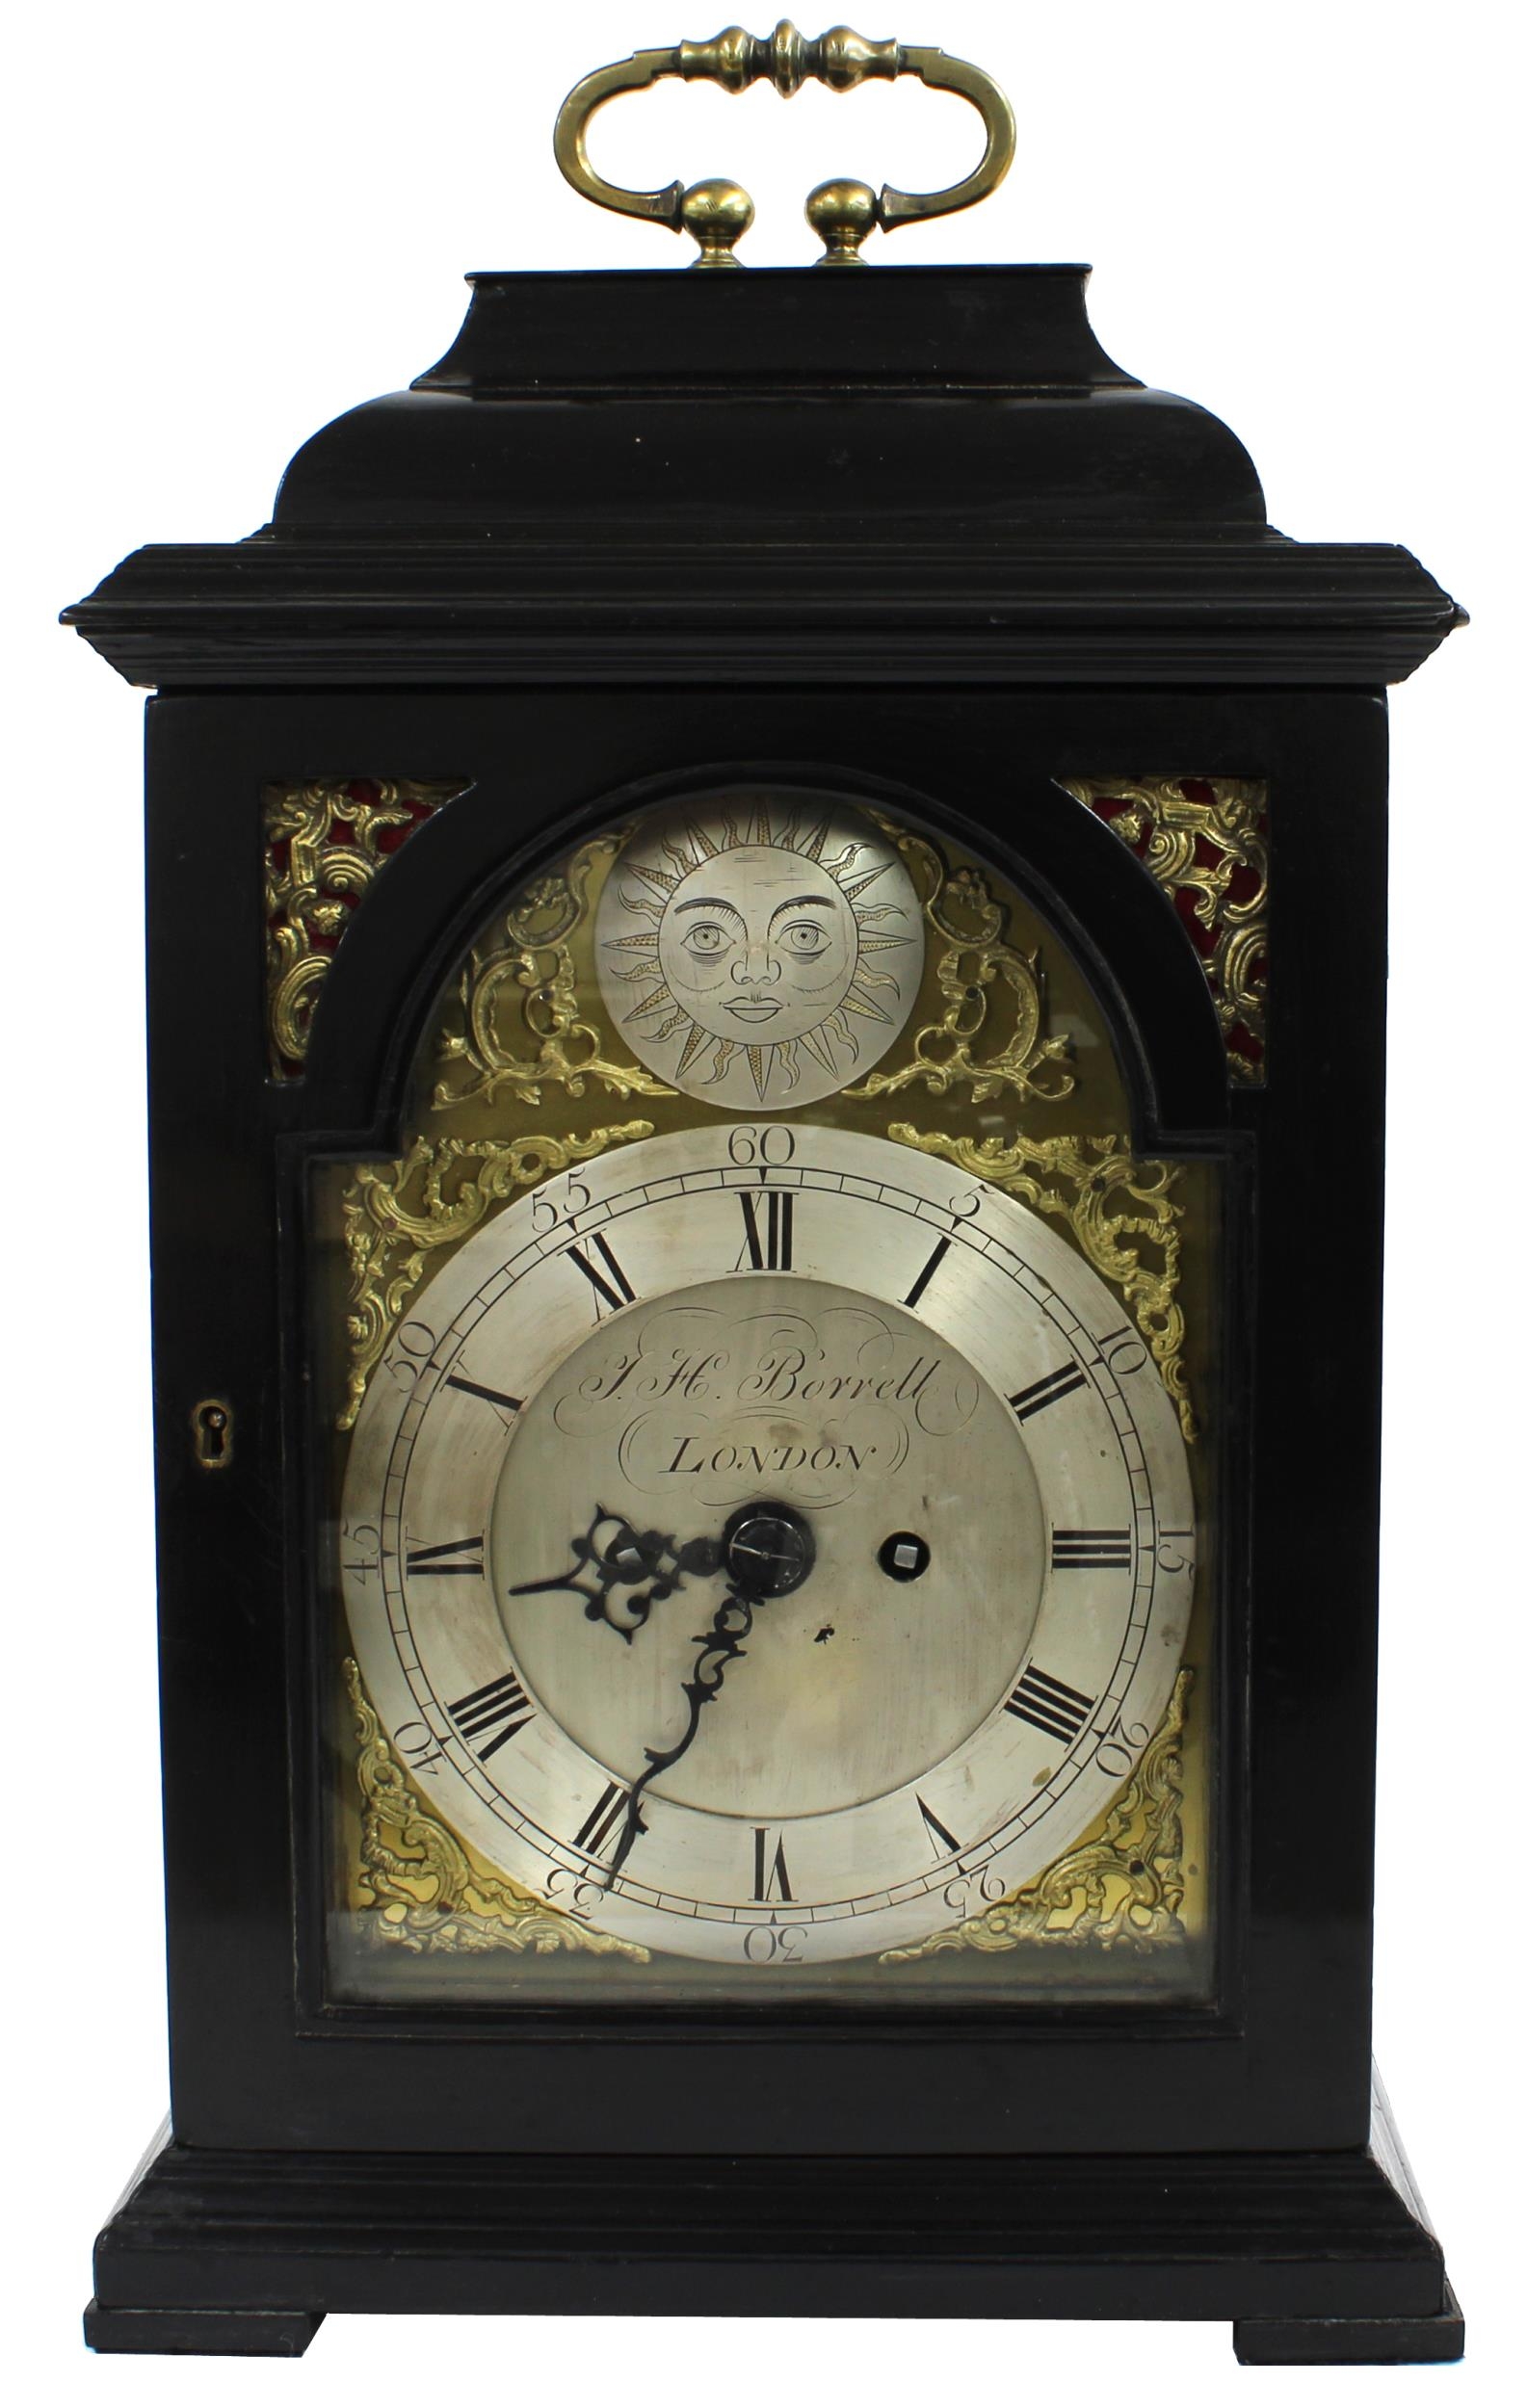 English ebonised double fusee bracket clock, the 7" brass arched dial signed J.H. Borrell, London on